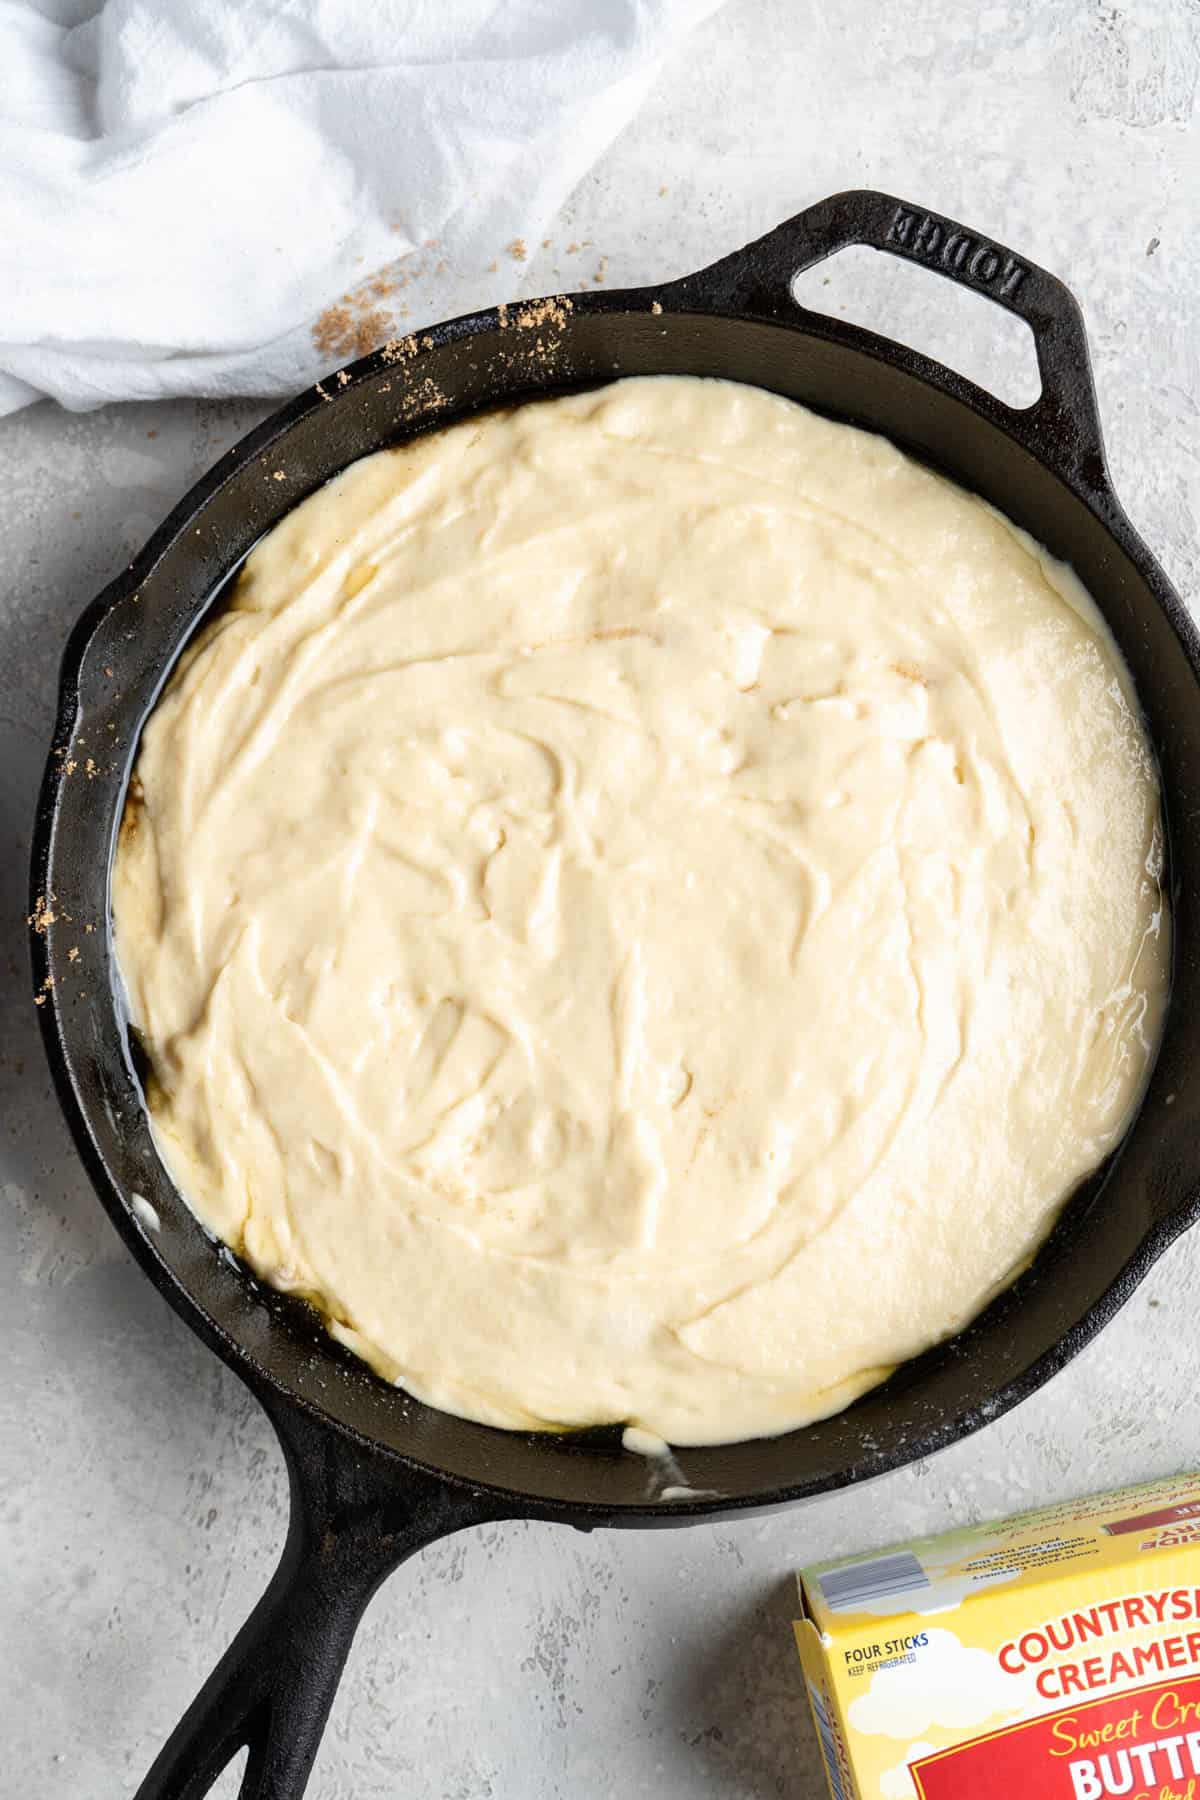 Cake batter spread in a cast iron skillet